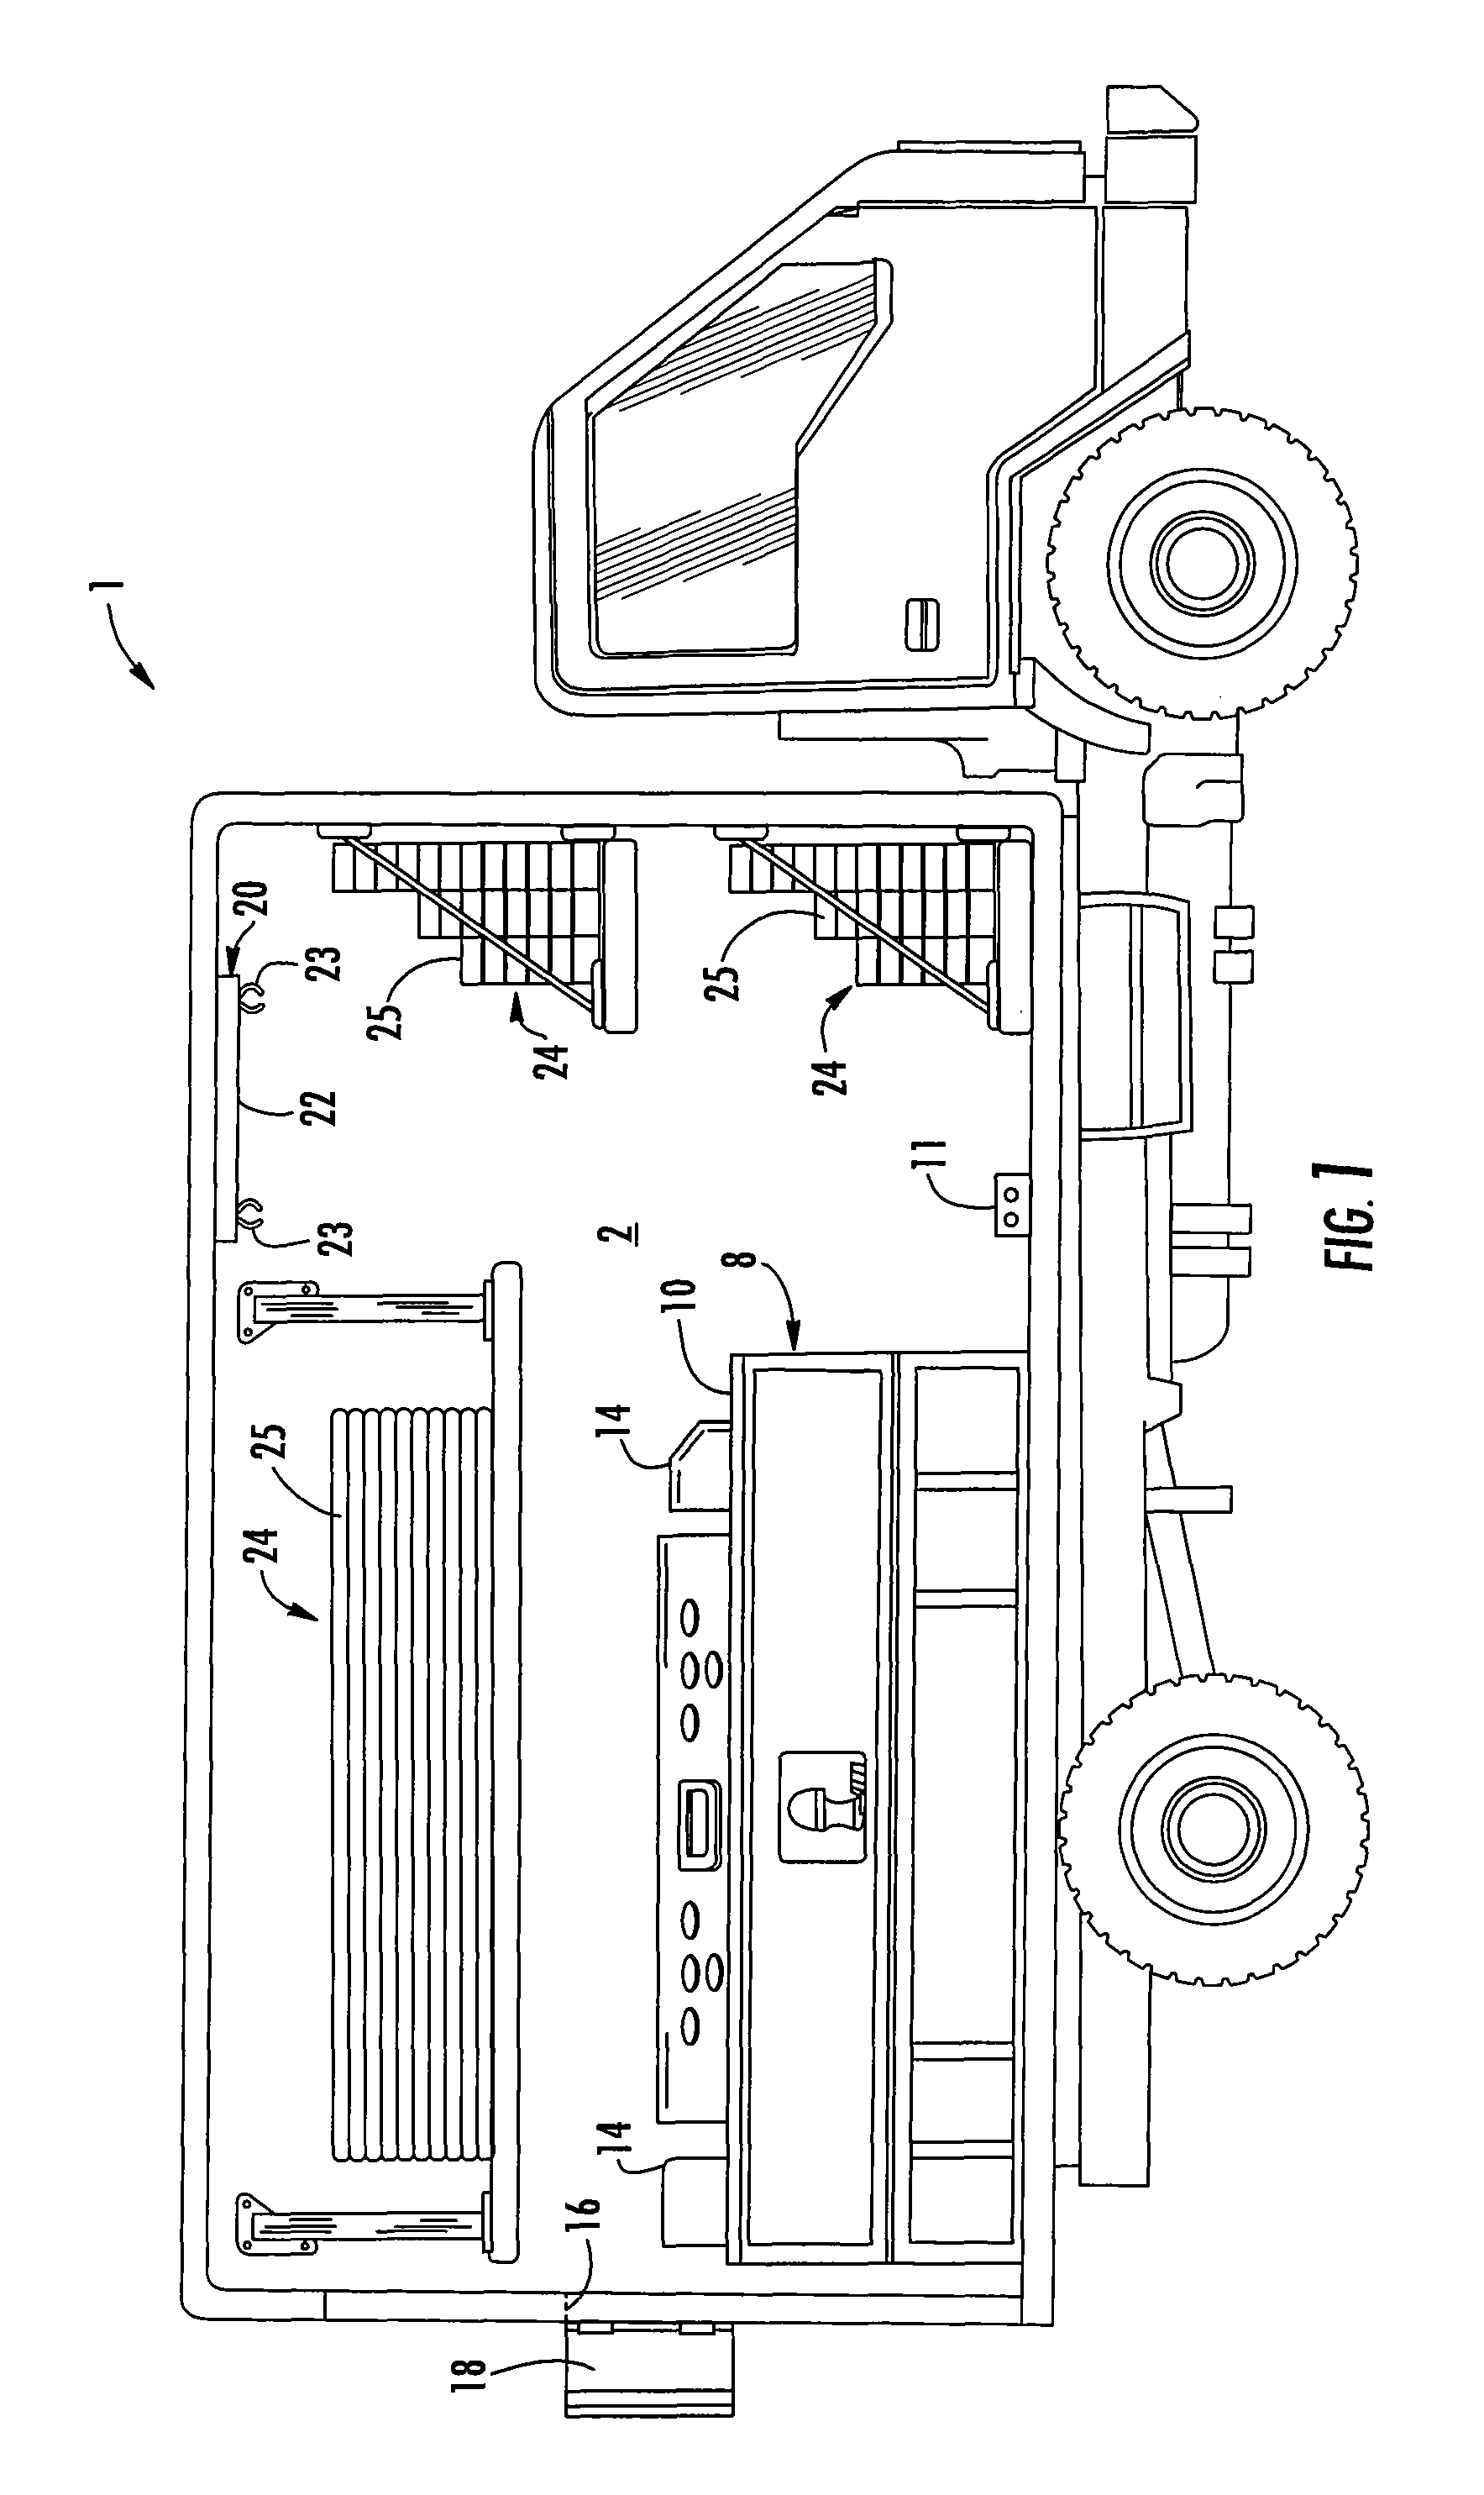 Method and apparatus for mobile blind installation